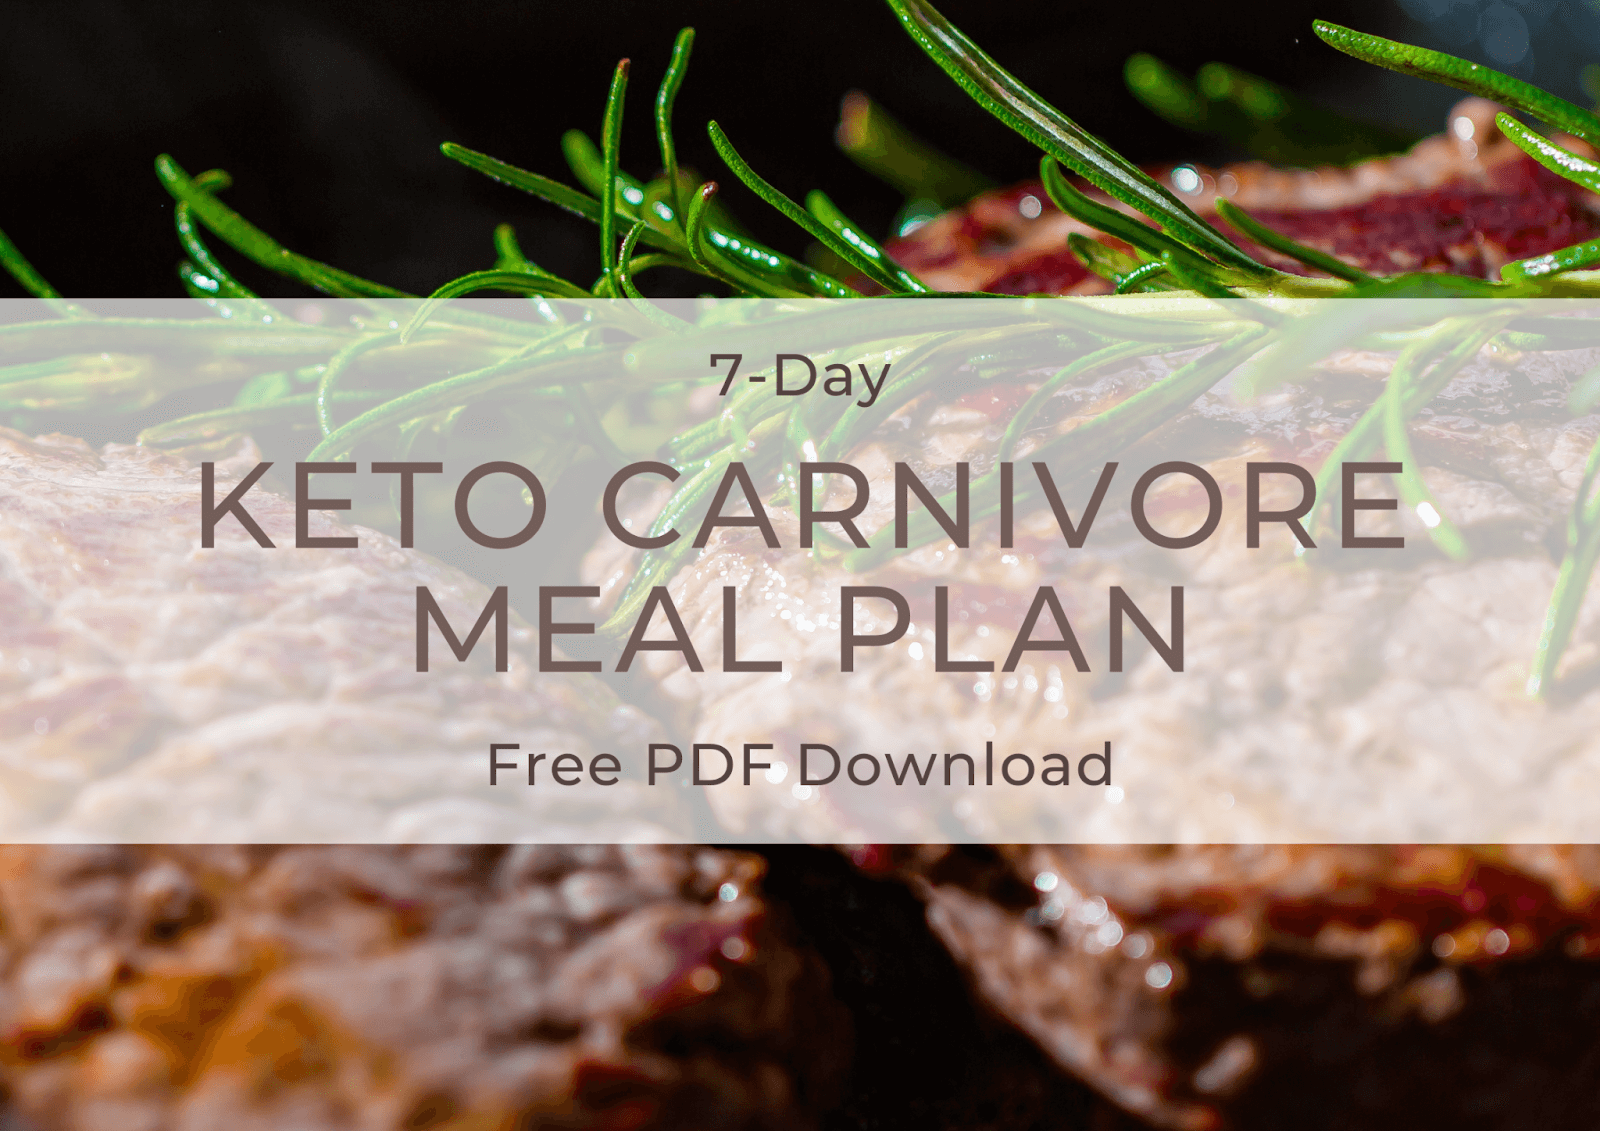 keto carnivore meal plan download cover